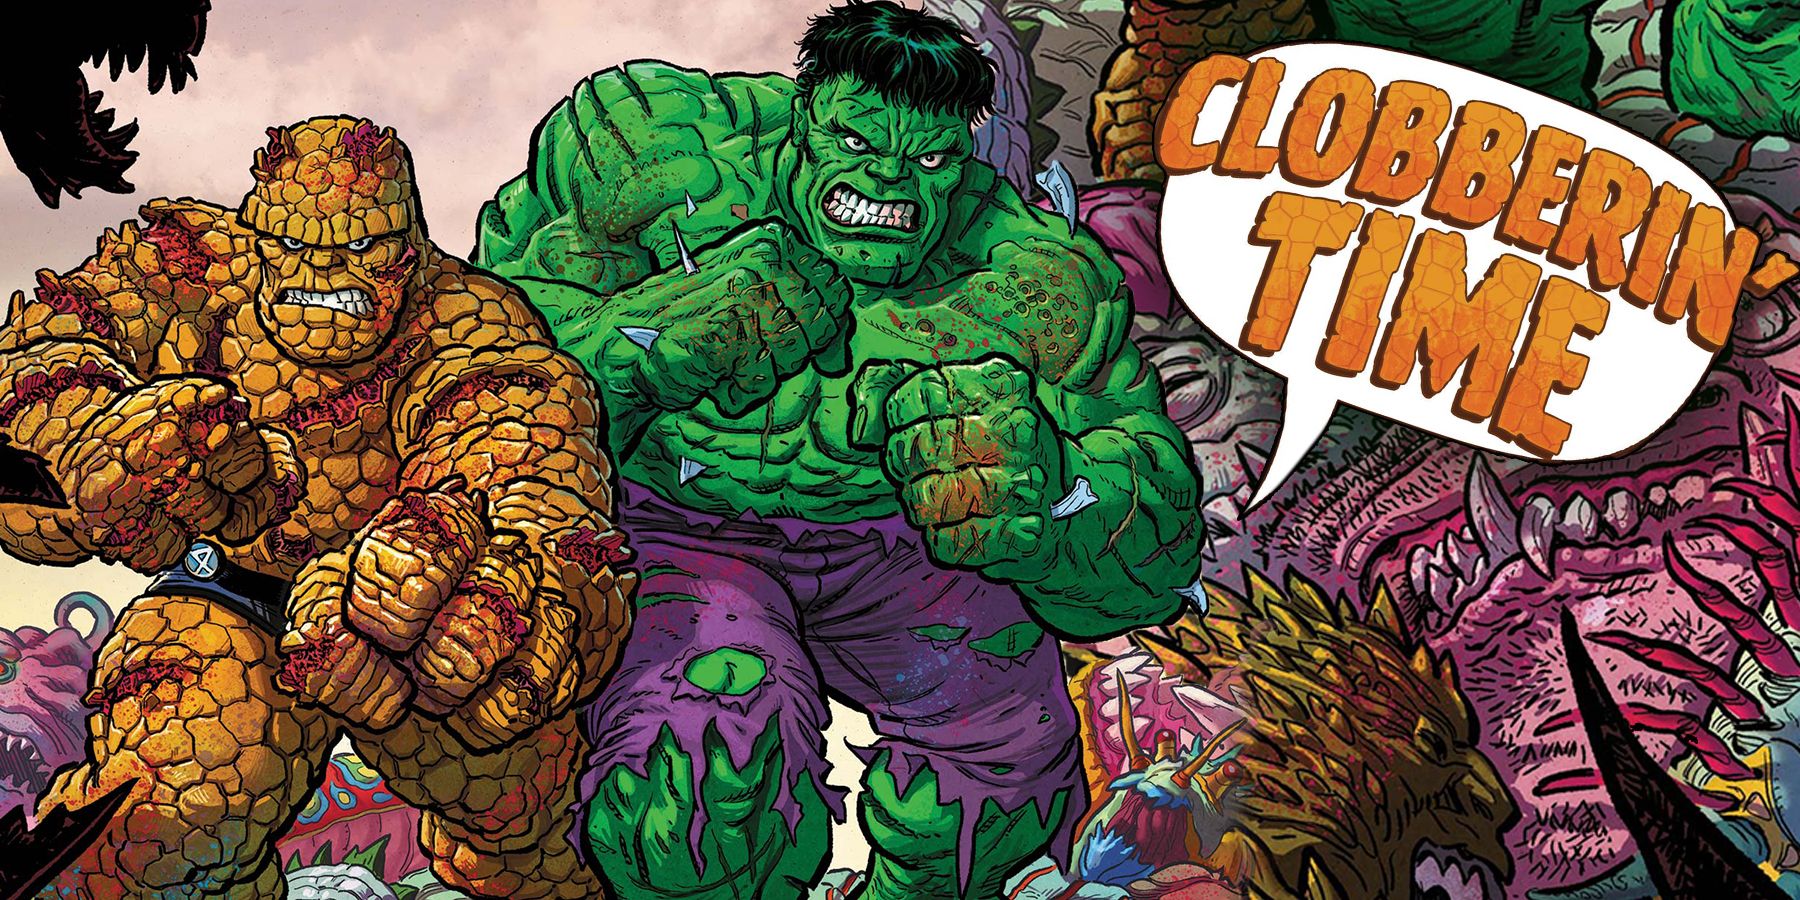 On the left, the Thing and the Hulk both stand with fists at the ready and gritted teeth. On the right, a speech bubble shows 'Clobberin' Time' with a pile of fallen enemies behind it.